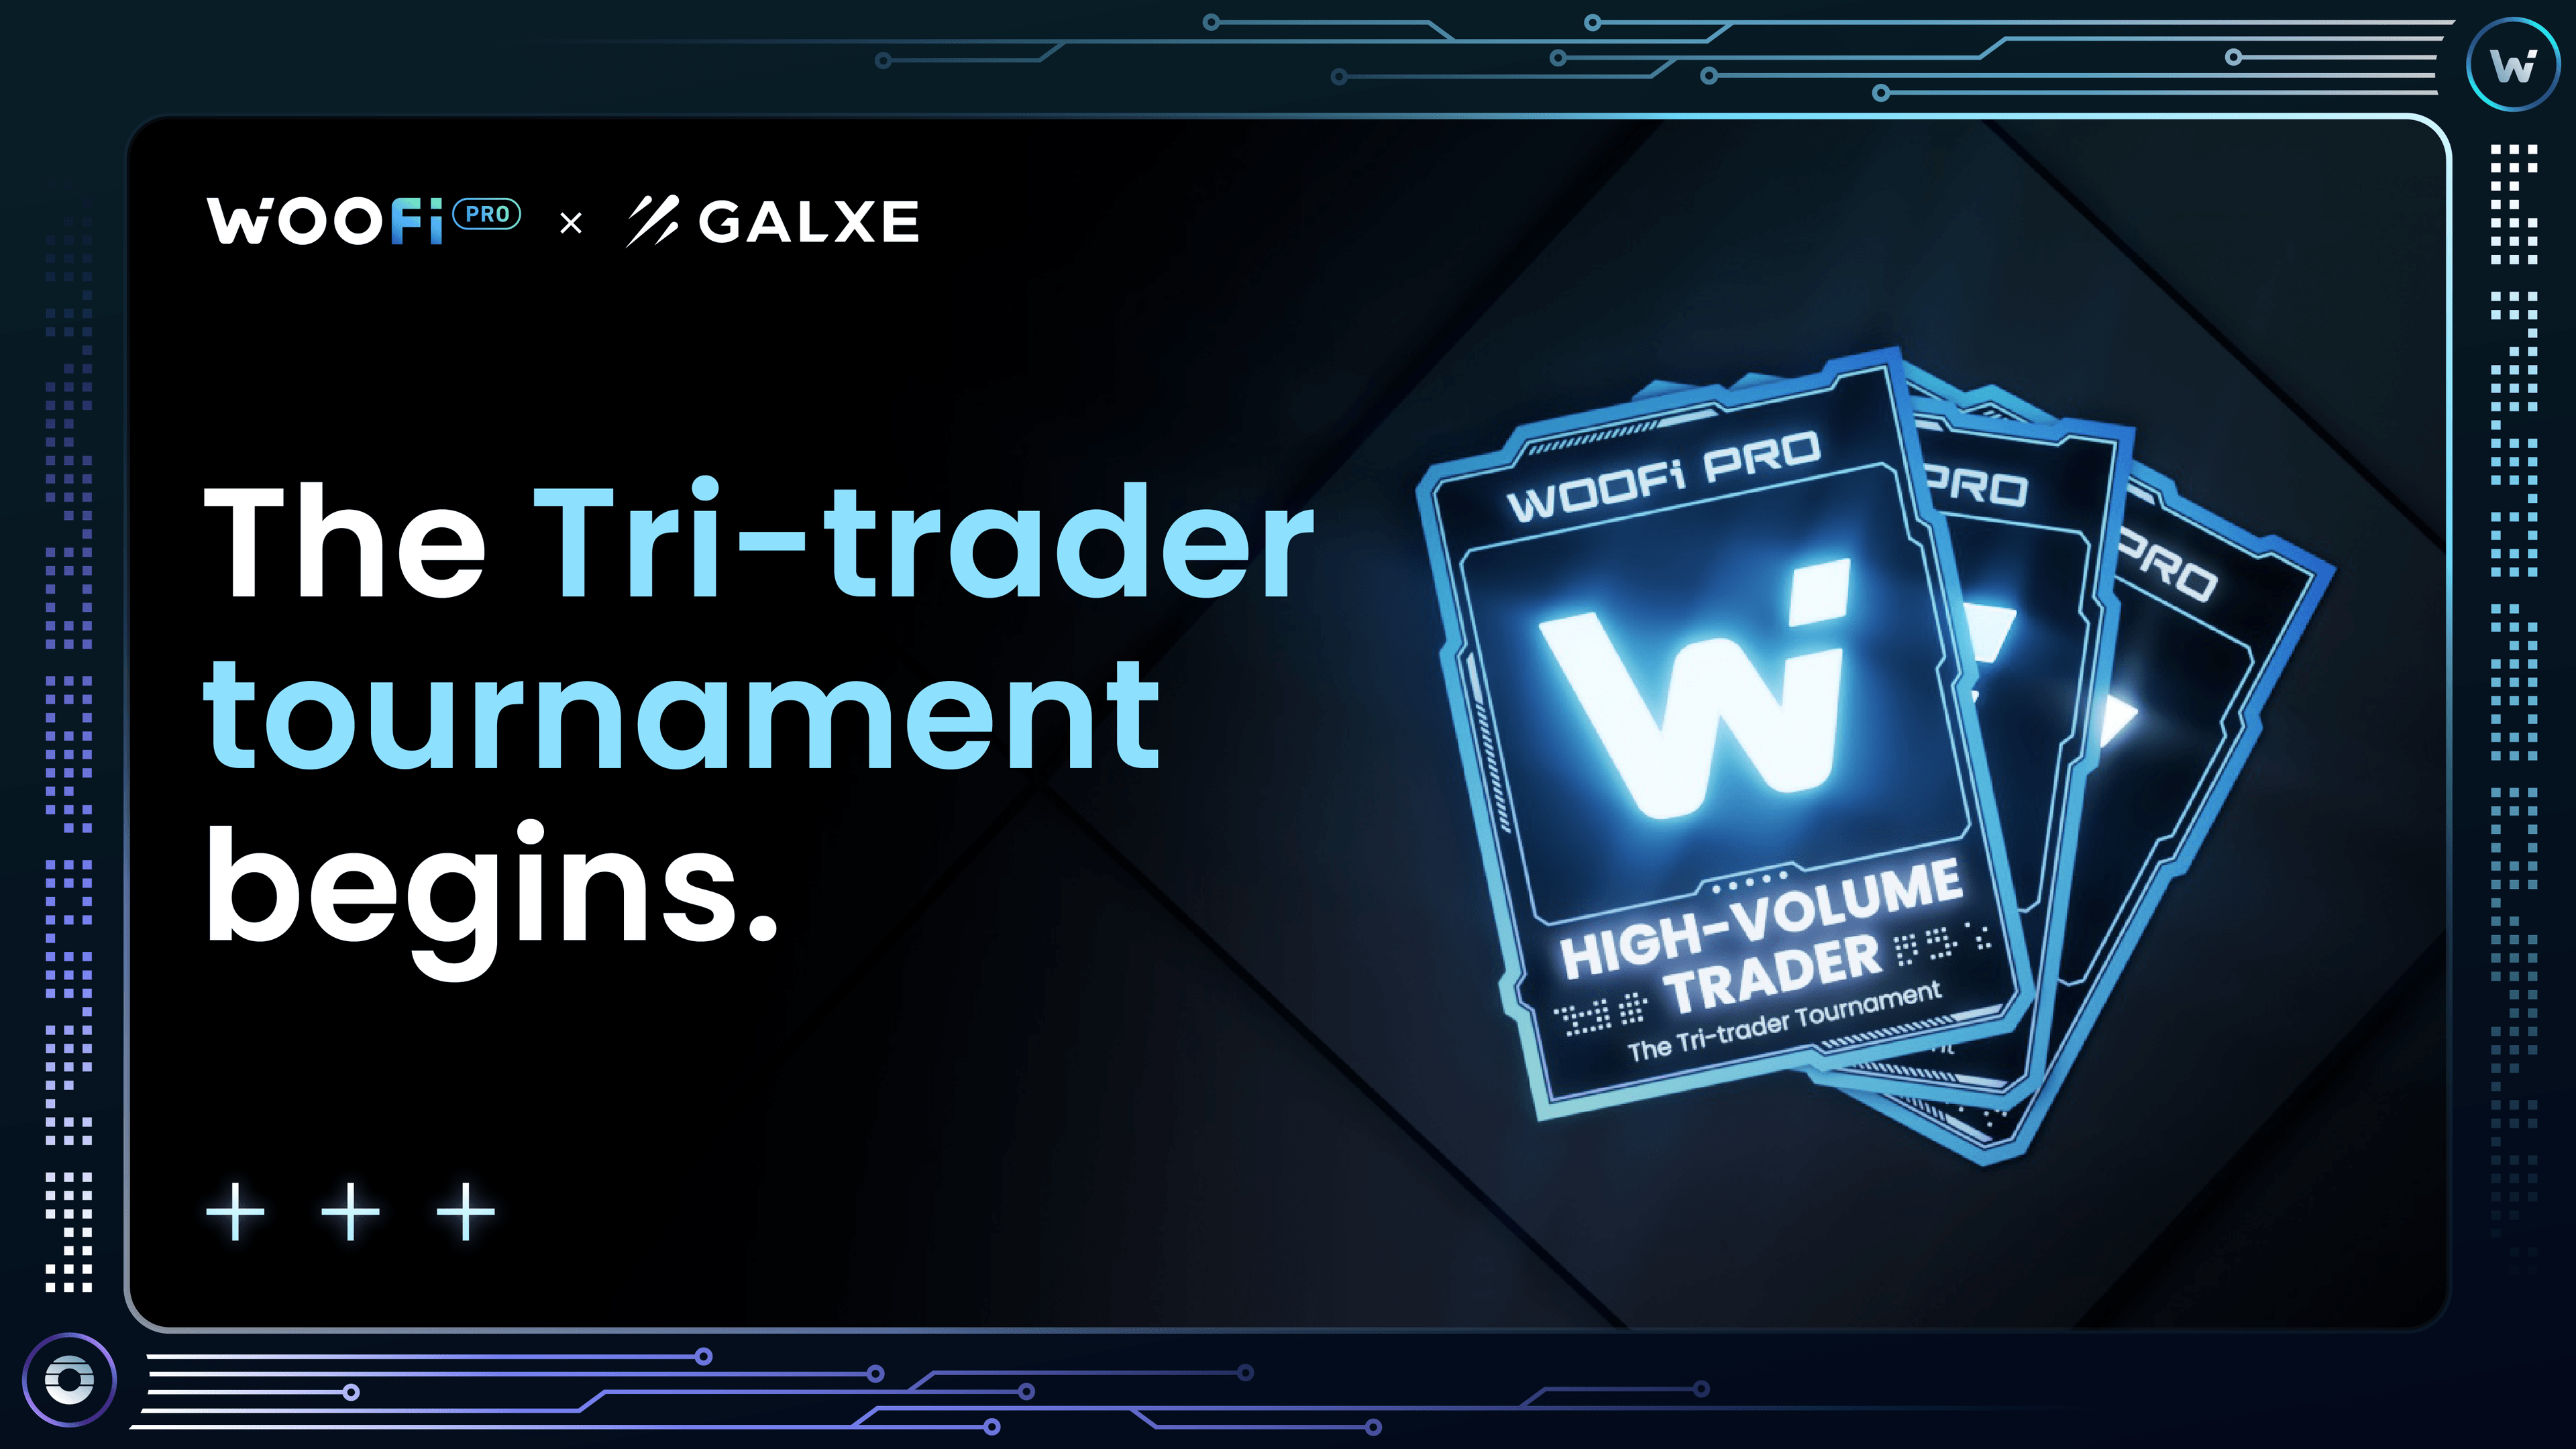 Let the Tri-trader tournament commence